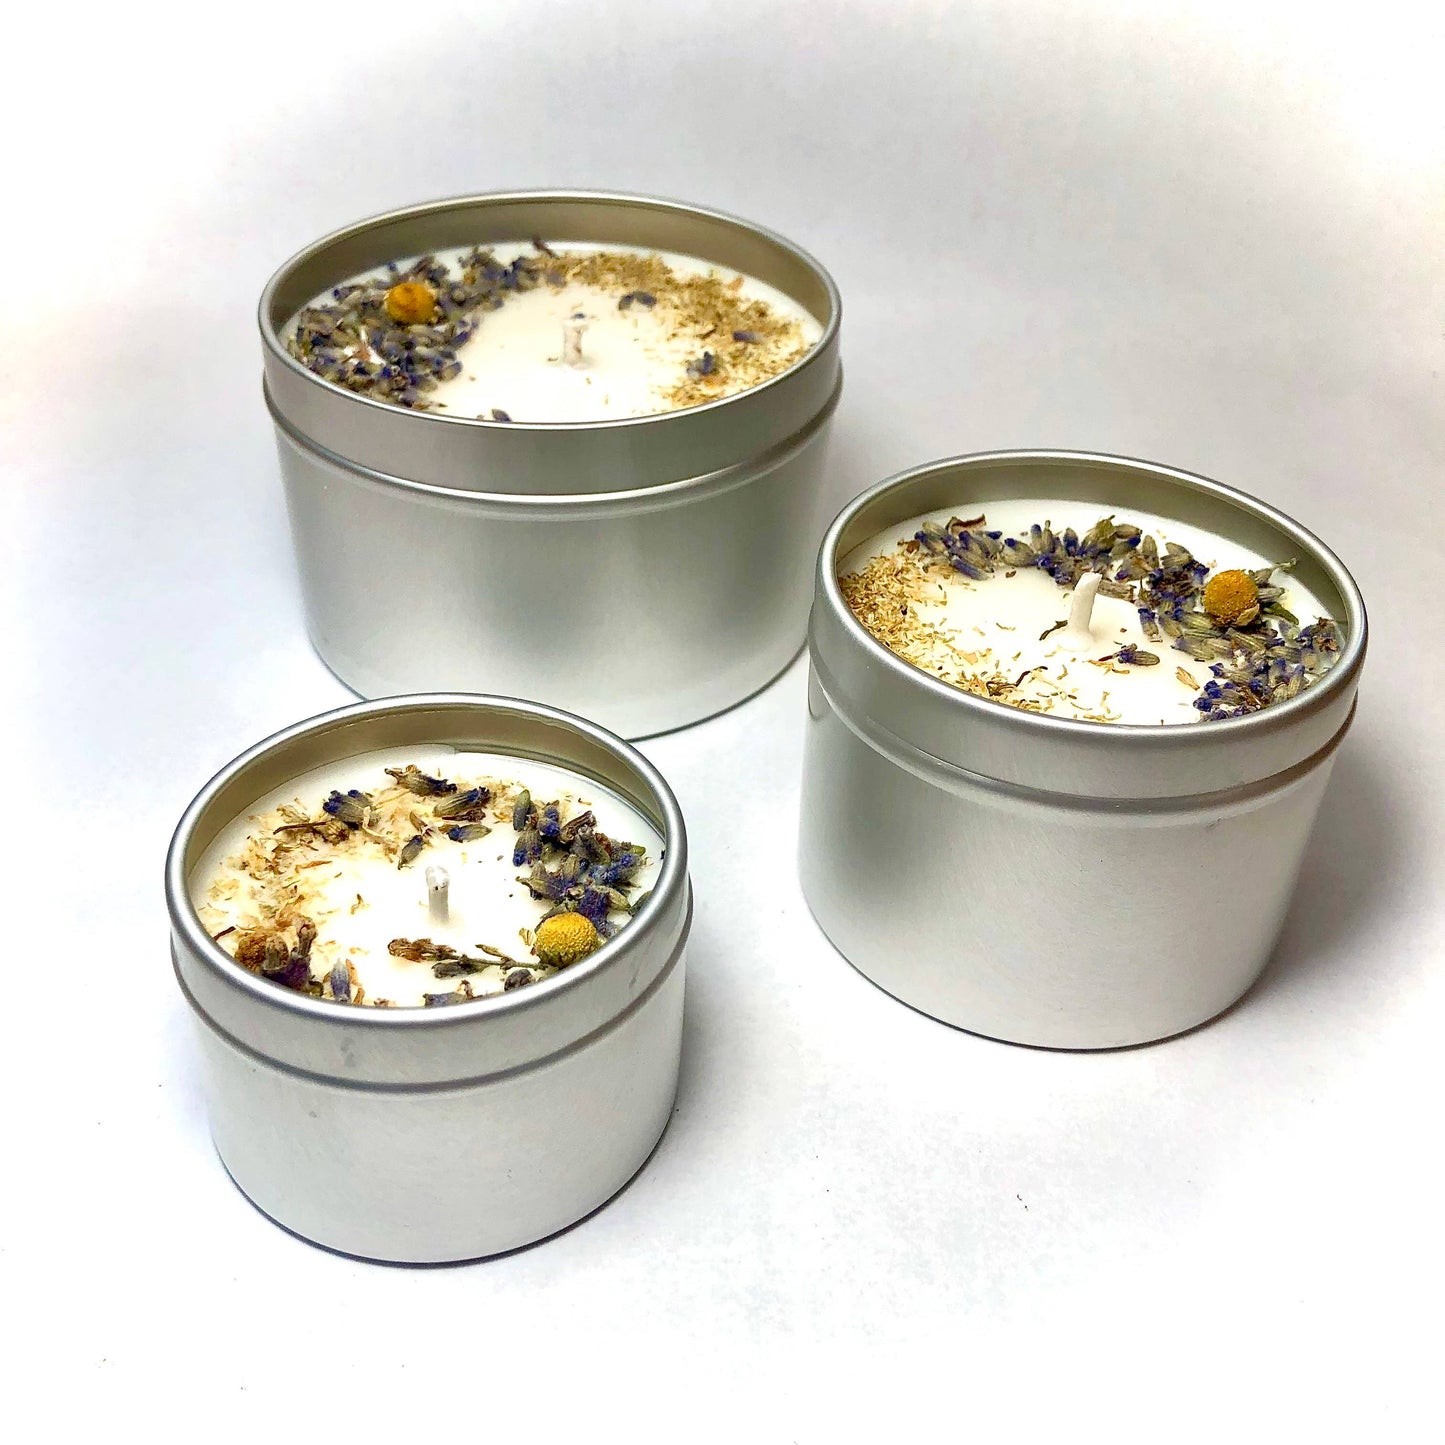 Sweet Dreams: 2 oz Lavender & Chamomile Soy Candle